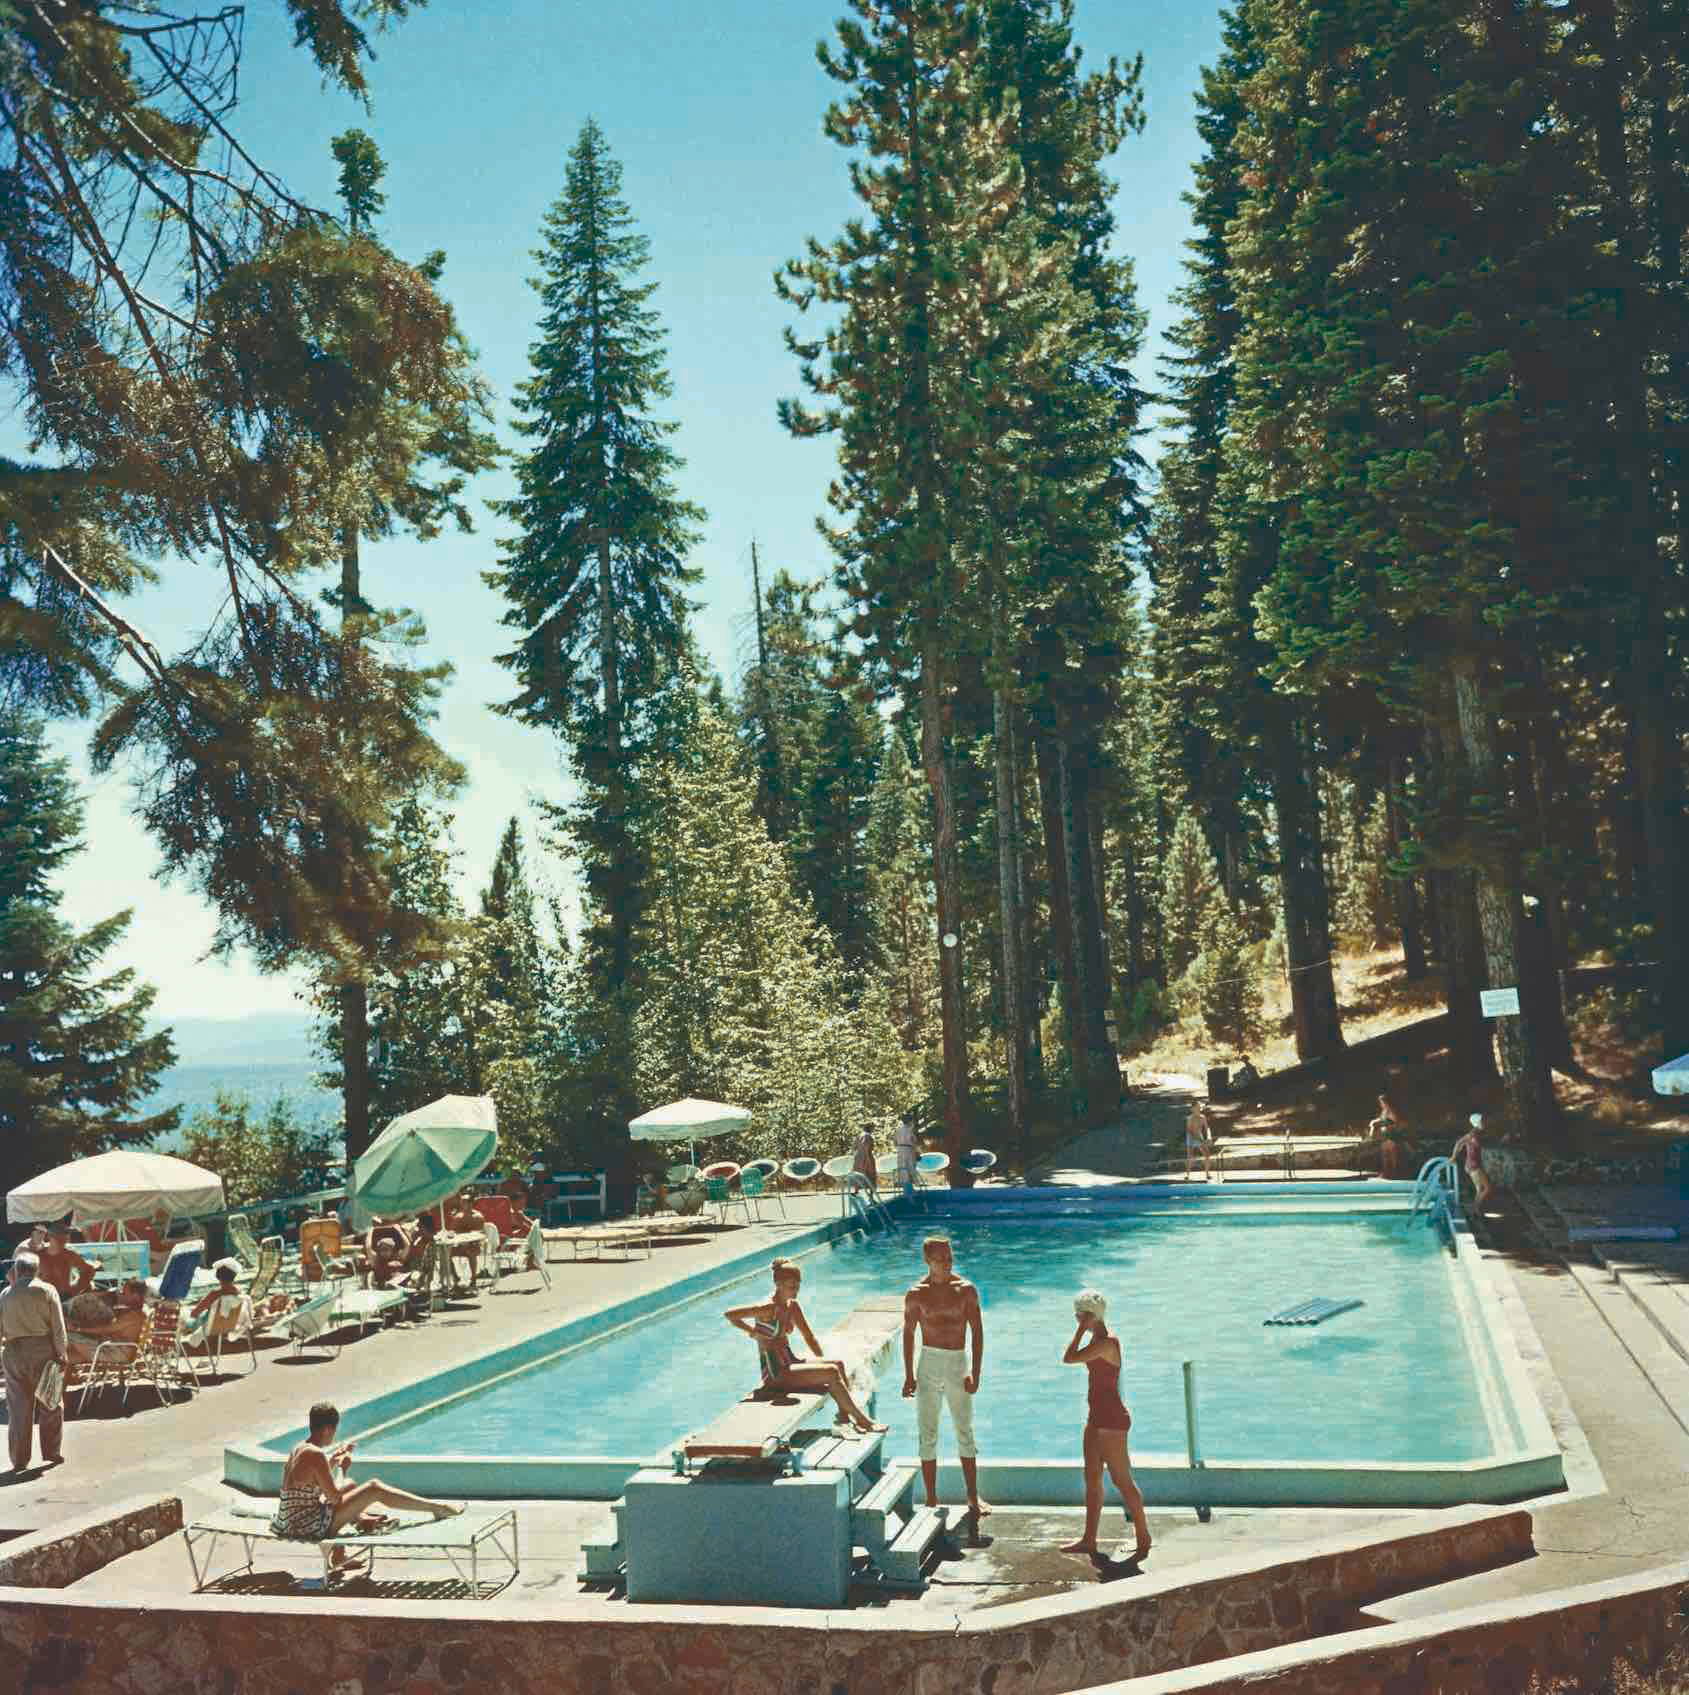 Pool At Lake Tahoe by Slim Aarons - A vintage photograph of bathers by the pool with a breathtaking backdrop of tall green trees and ocean in the distance.